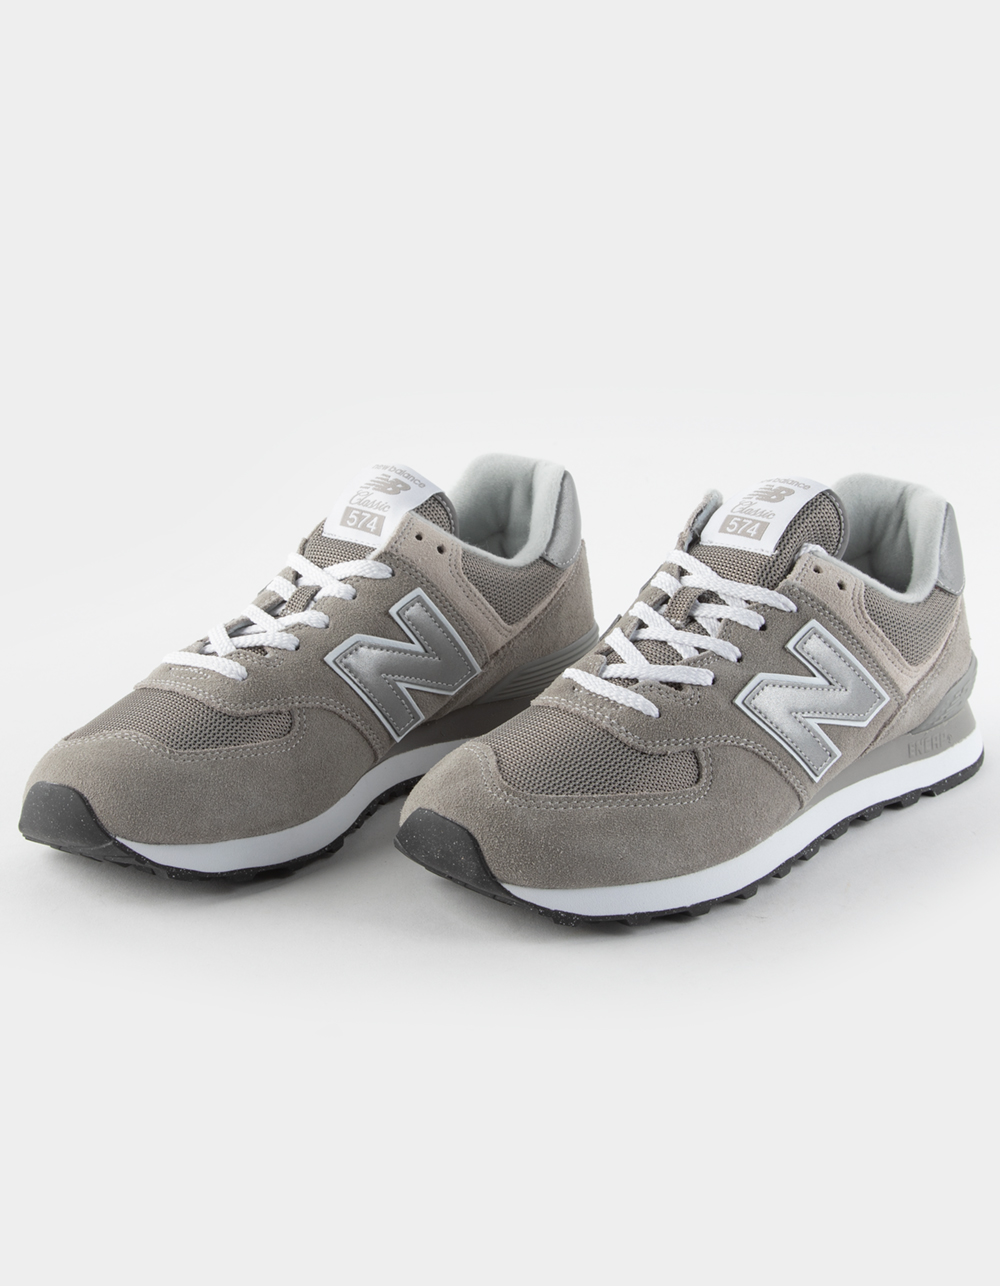 NEW BALANCE 574 Mens Shoes - GRAY/WHITE | Tillys